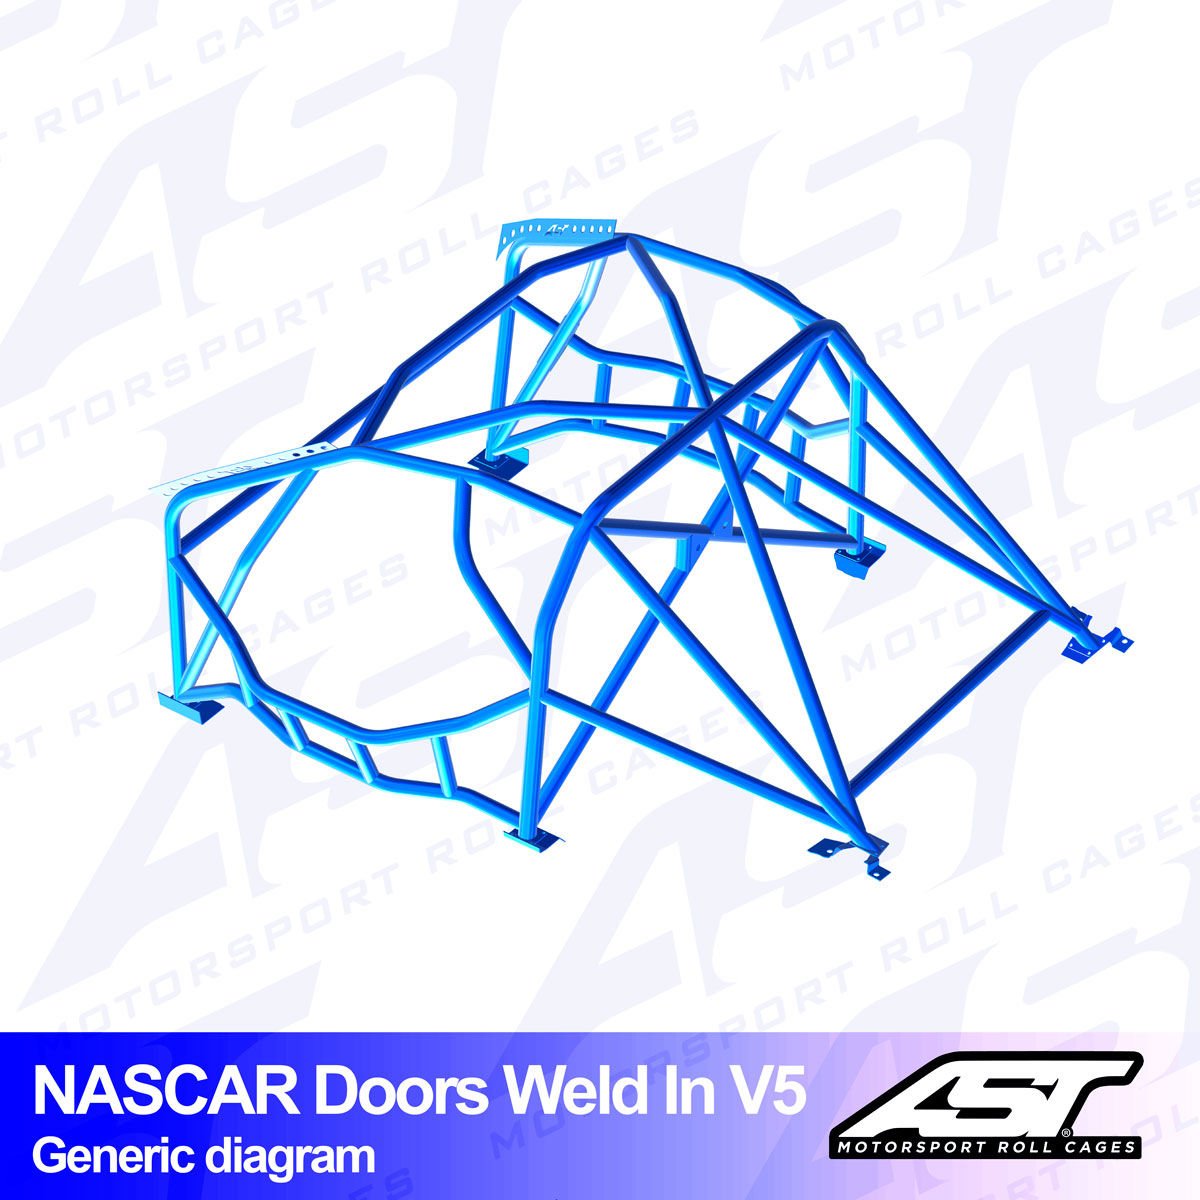 Roll Cage BMW (E34) 5-Series 5-doors Touring RWD WELD IN V5 NASCAR-door for drift